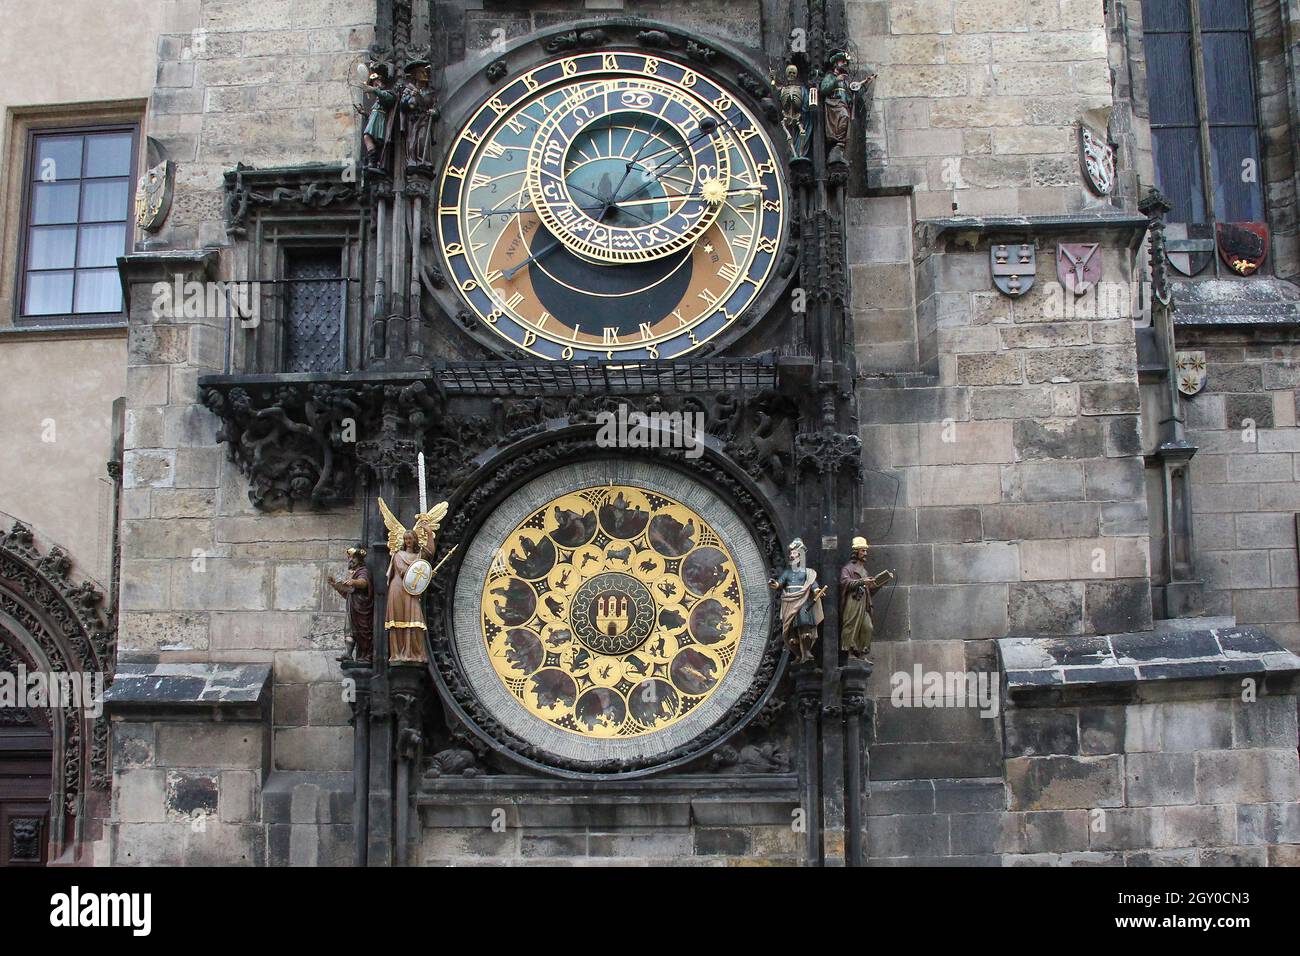 Gebruikelijk verzekering kompas PRAGUE, CZECH - APRIL 23, 2012: The Prague Astronomical Clock is a medieval  tower clock mounted on the southern wall of the Old Town Hall Tower on the  Stock Photo - Alamy